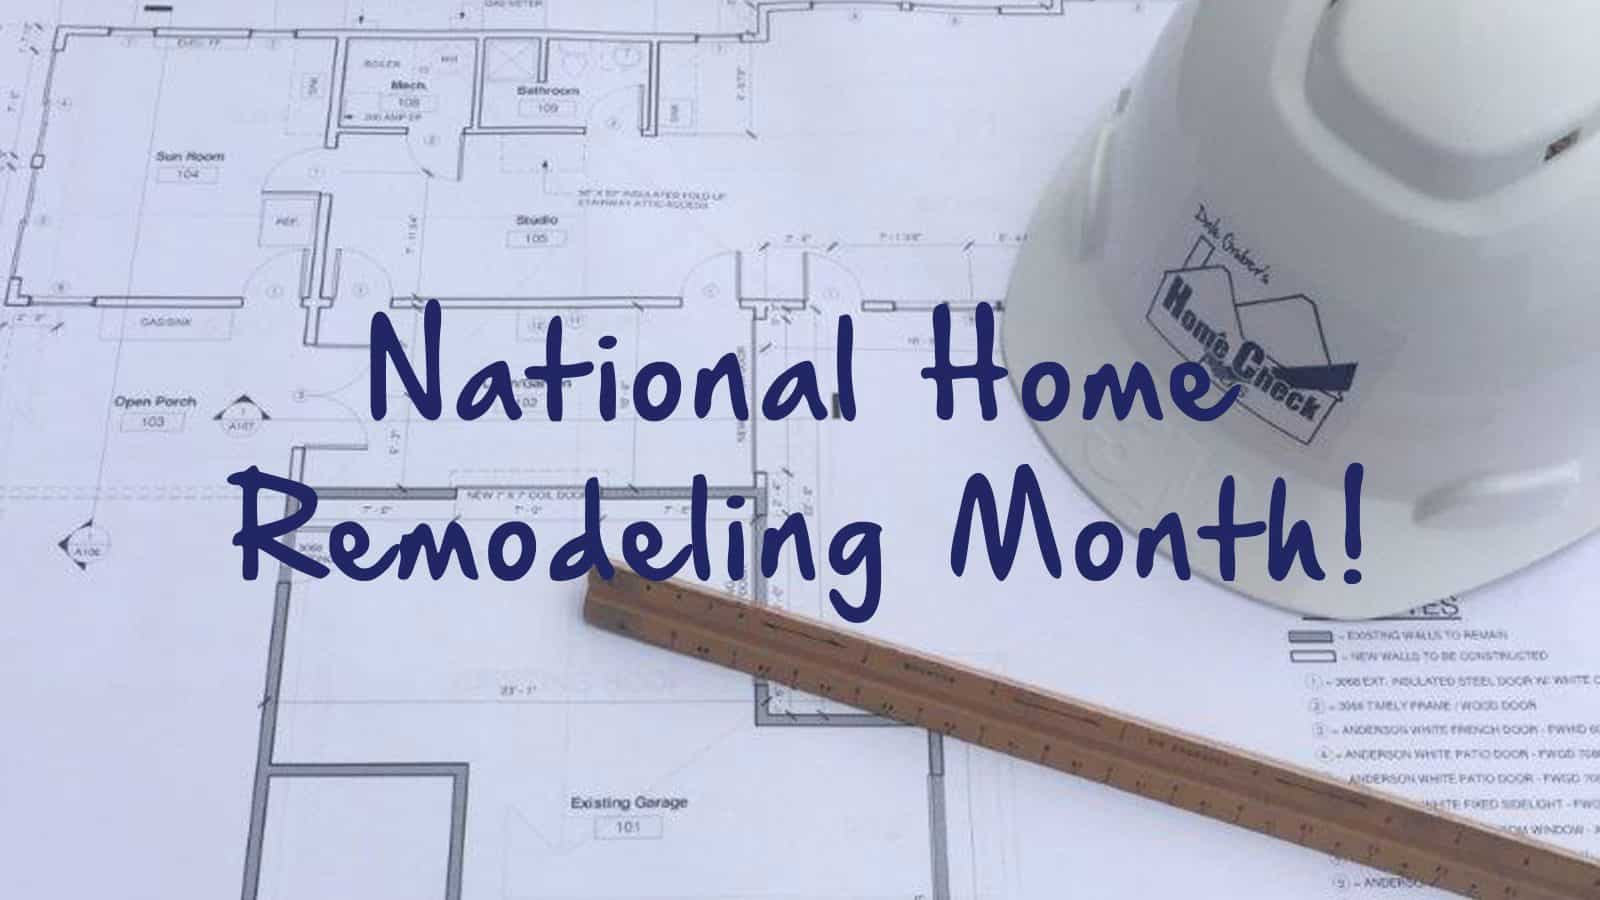 May is National Home Remodeling Month!